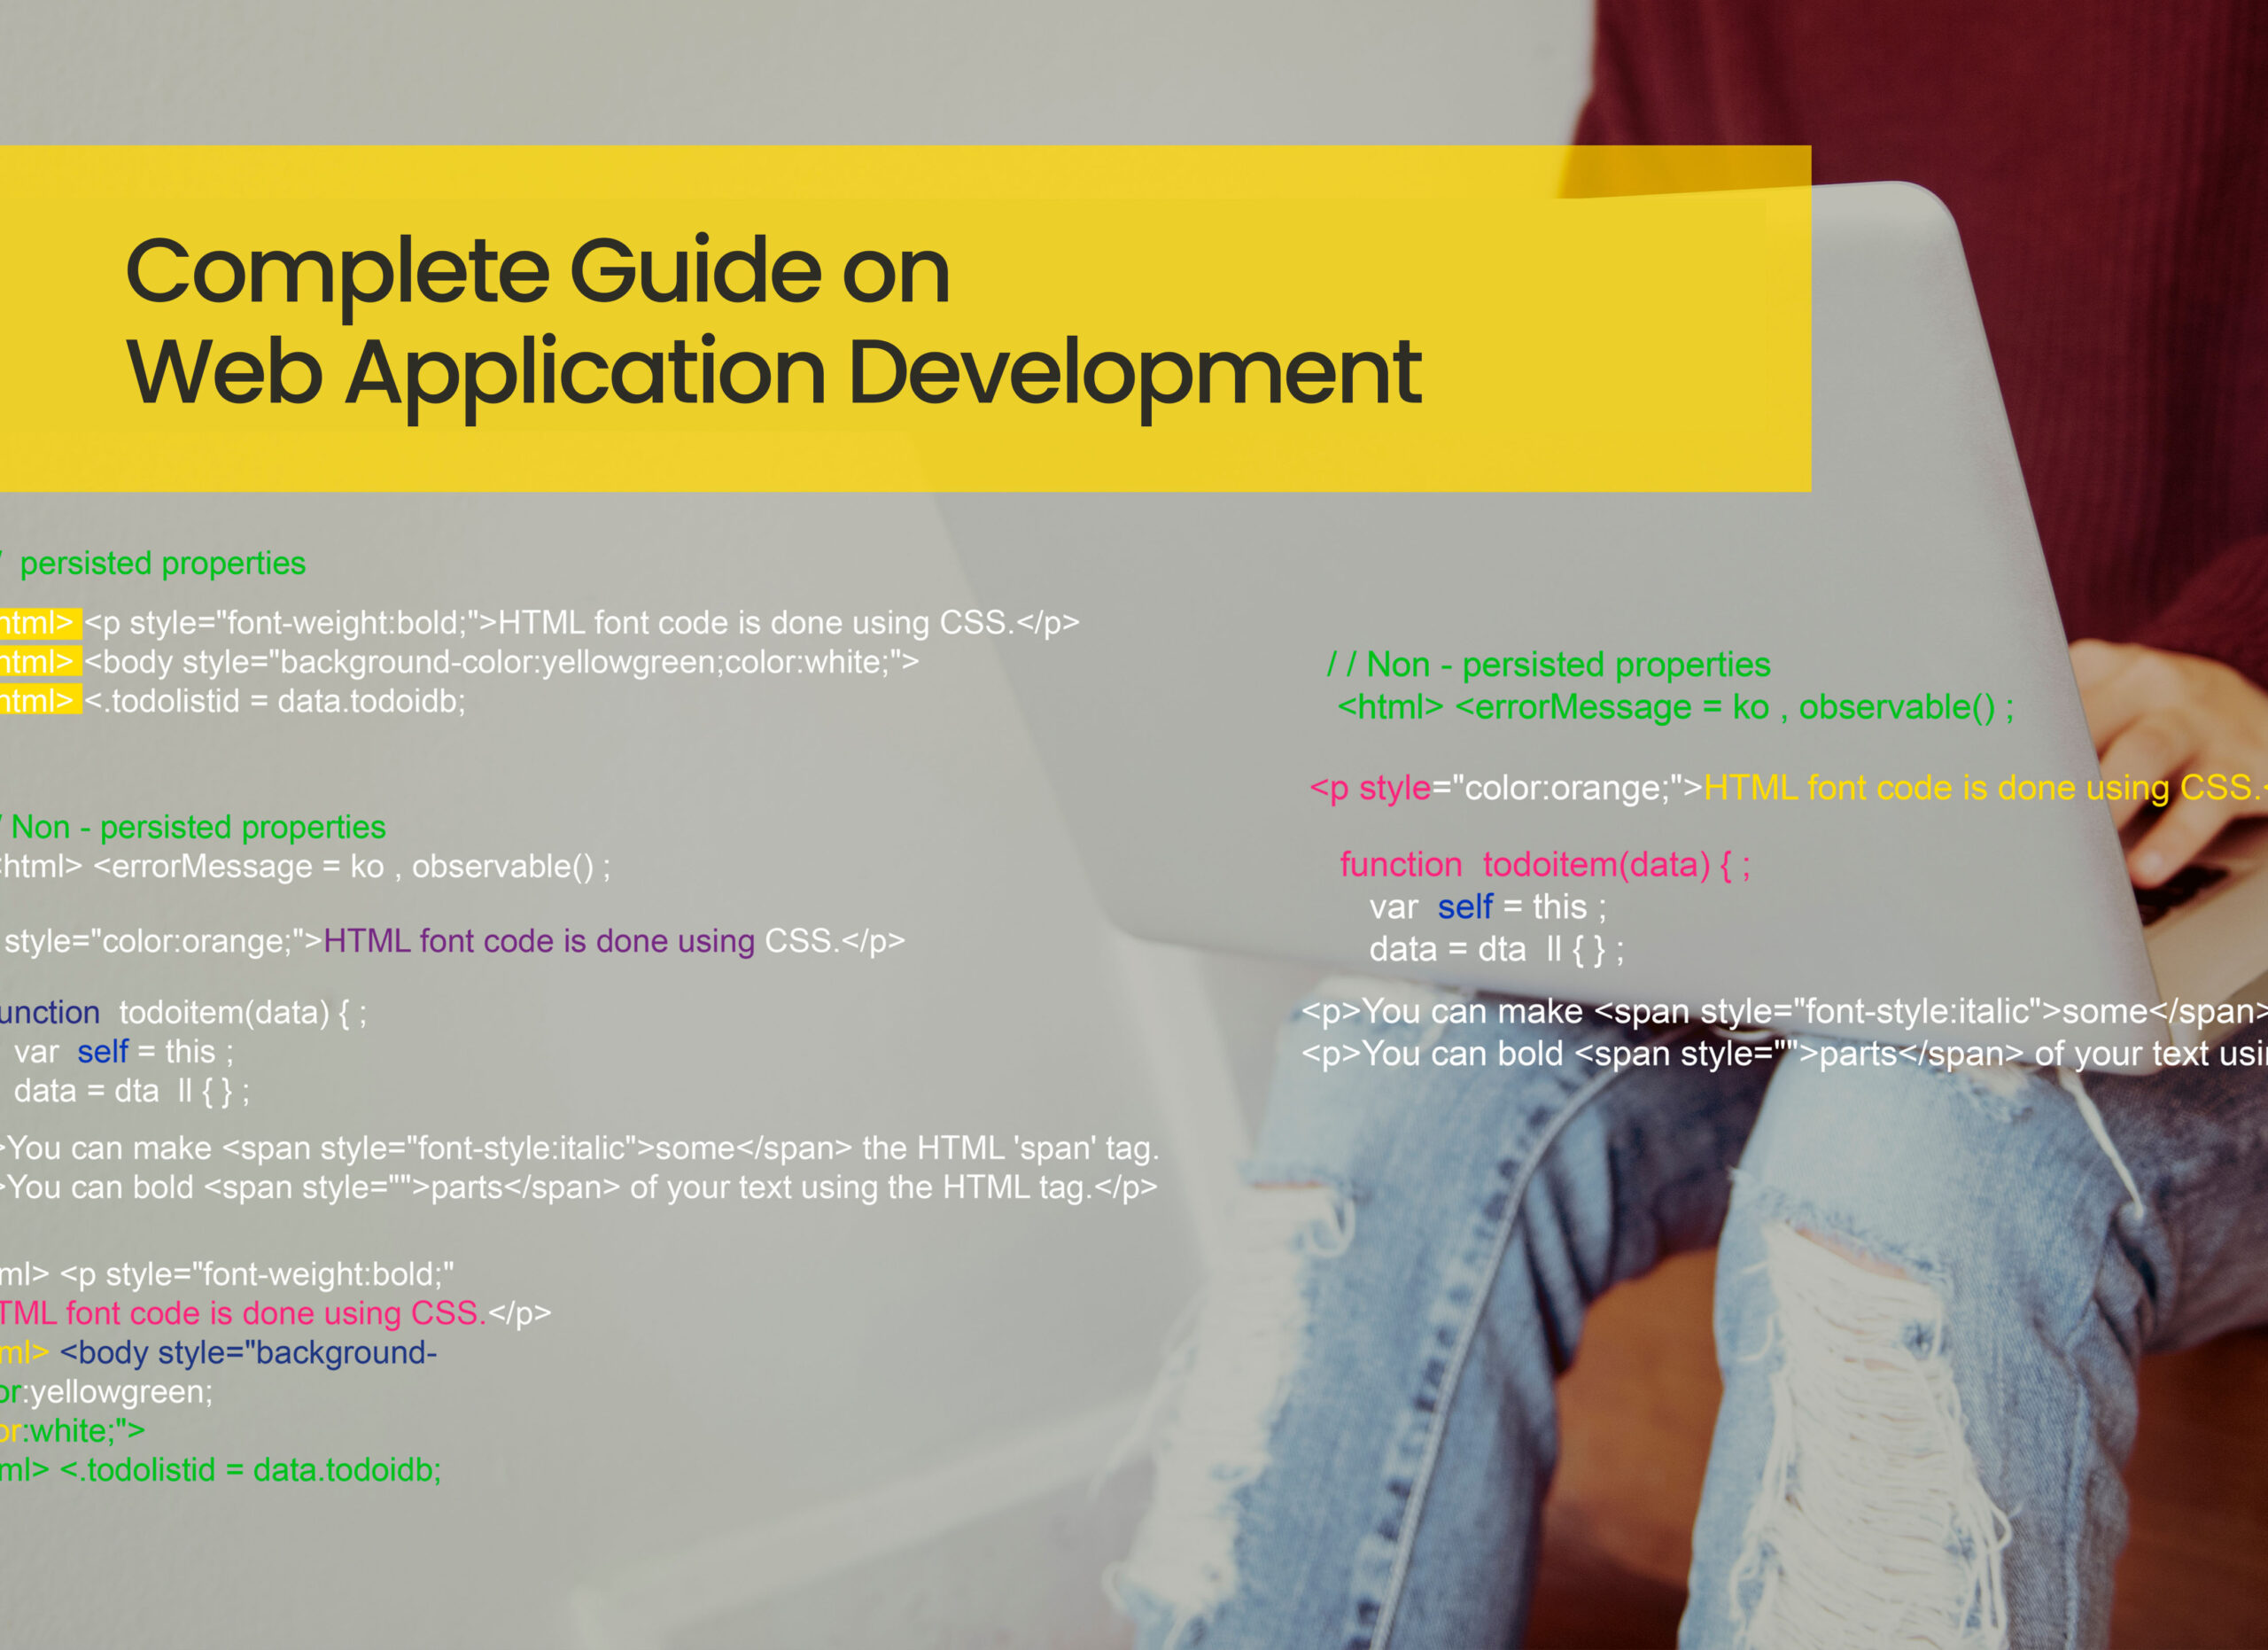 Complete Guide on Web Application Development for your Business (2013 Update)